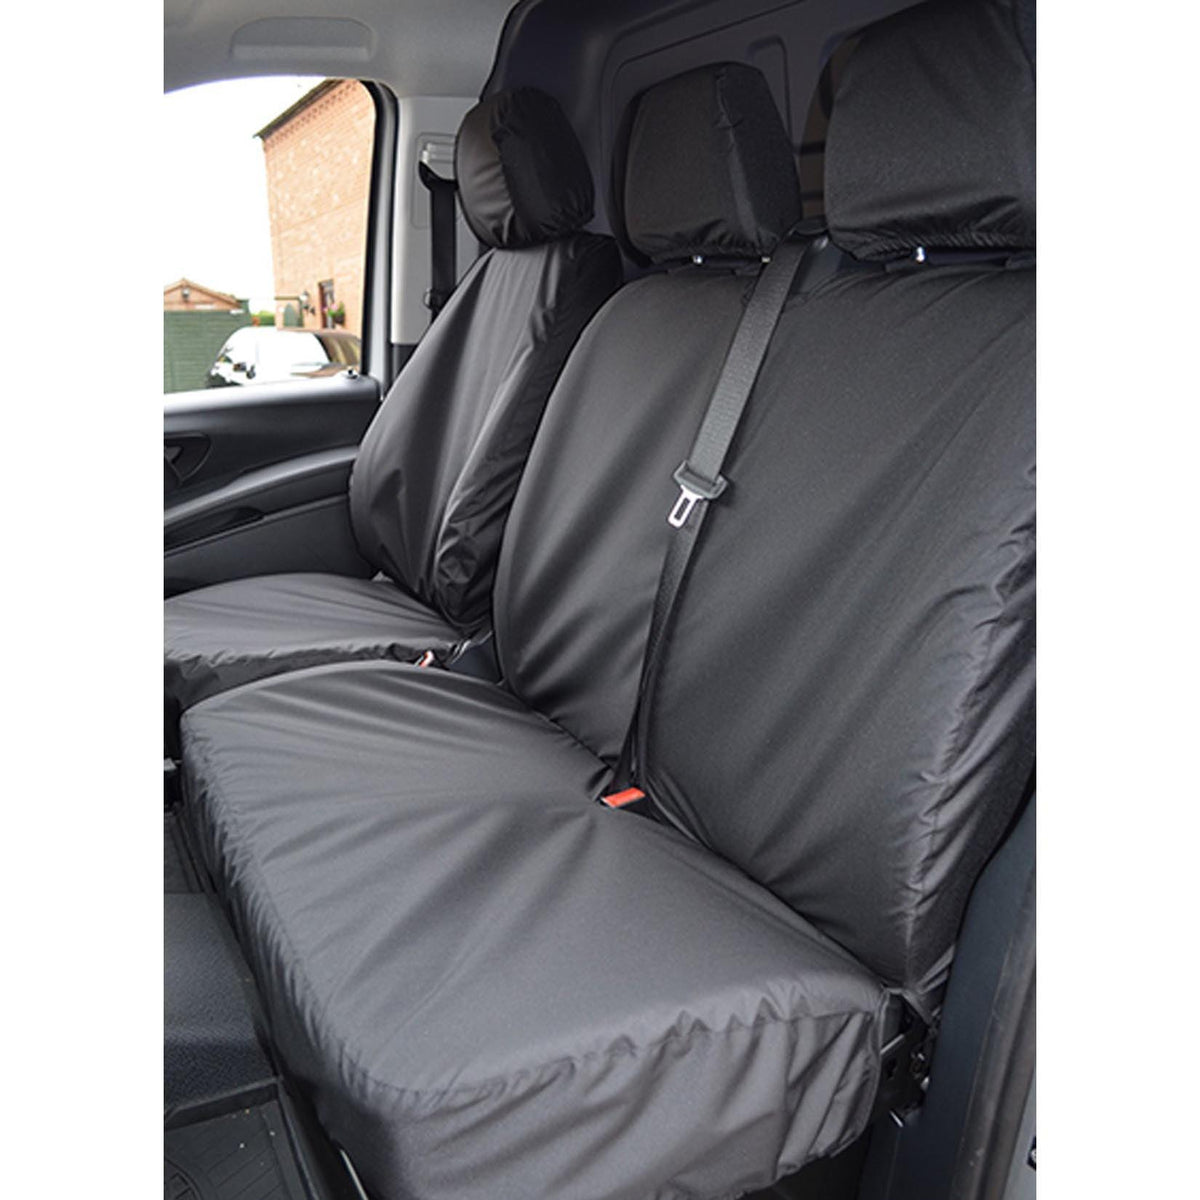 MERCEDES VITO 2015 ON DRIVER AND FRONT DOUBLE PASSENGER SEAT COVERS - BLACK - Storm Xccessories2